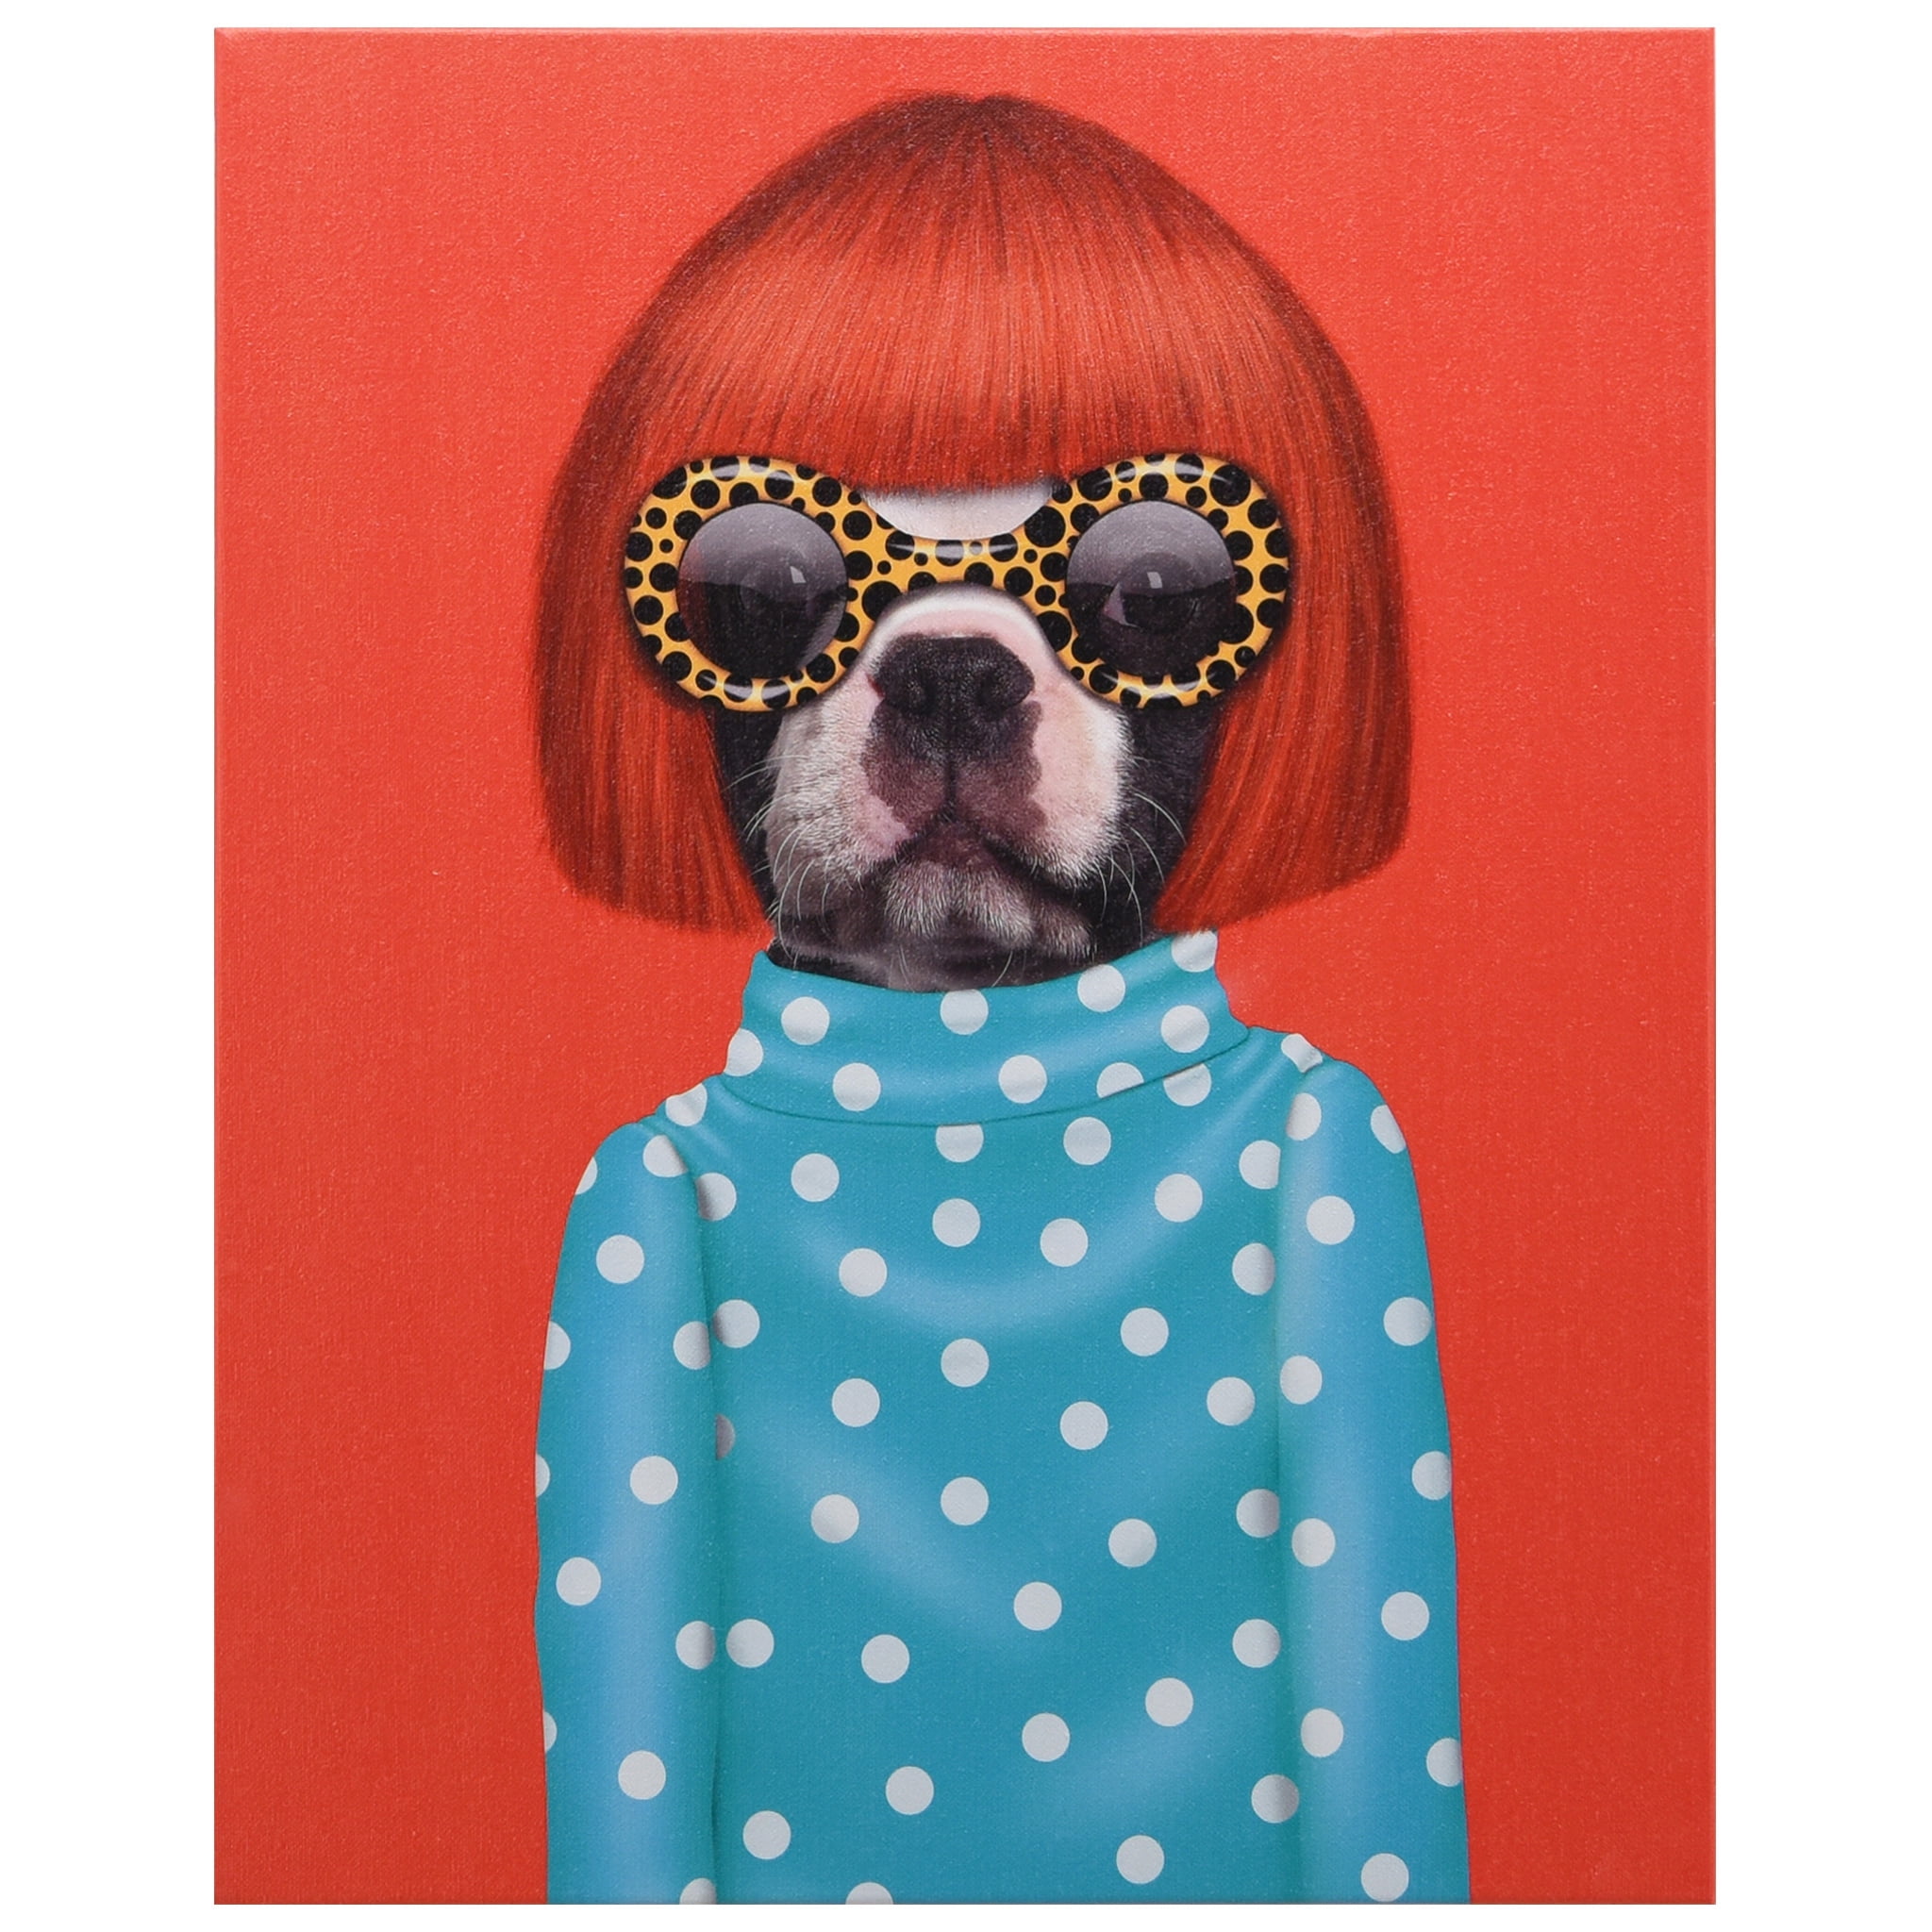 Empire Art Direct Pets Rock Pop Graphic Art on Wrapped Canvas Dog 